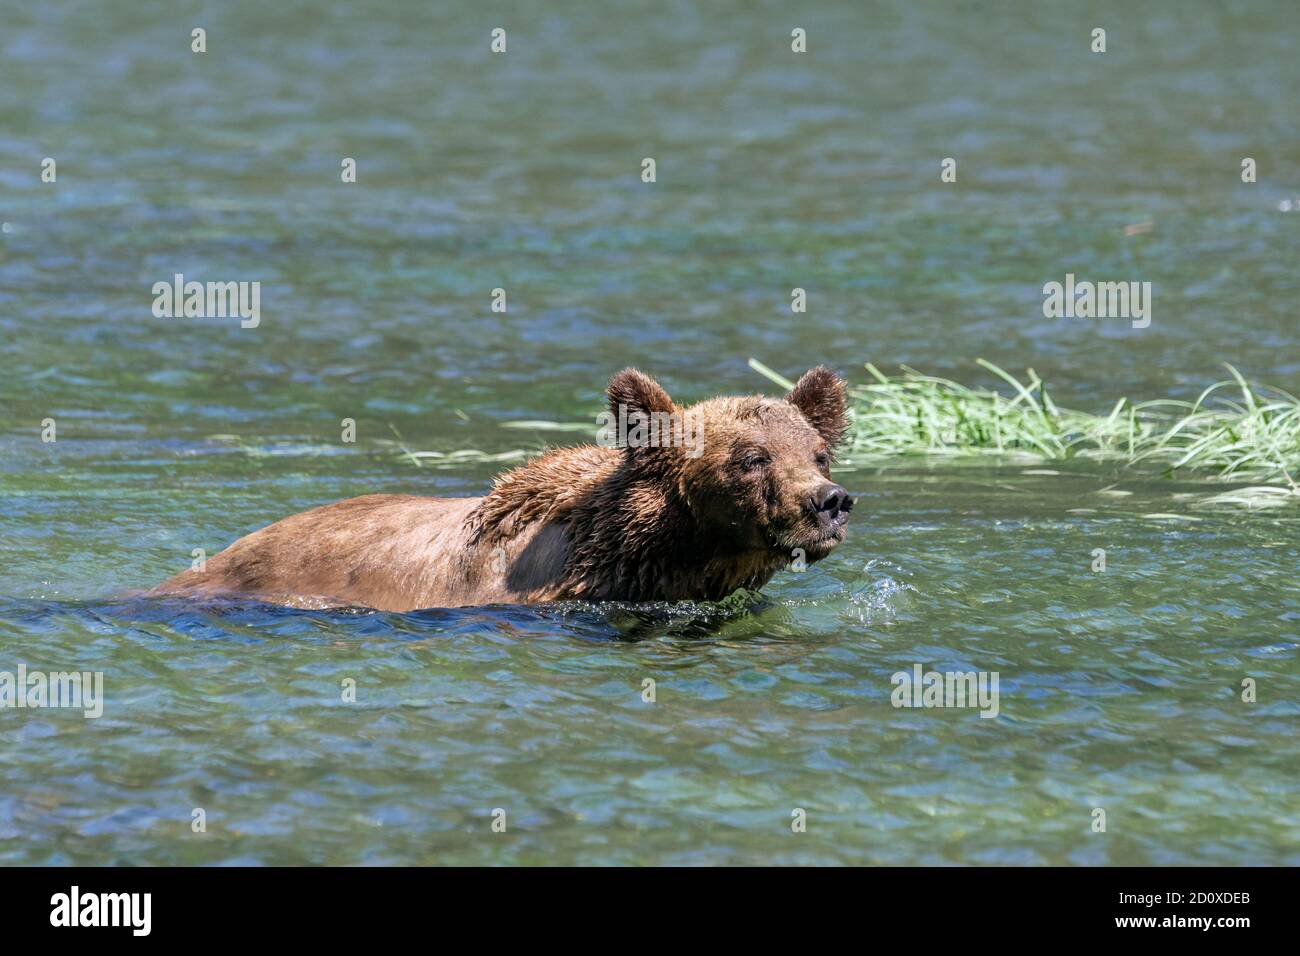 Grizzly bear leaving the water for a patch of sedge grass, Khutzeymateen, BC Stock Photo